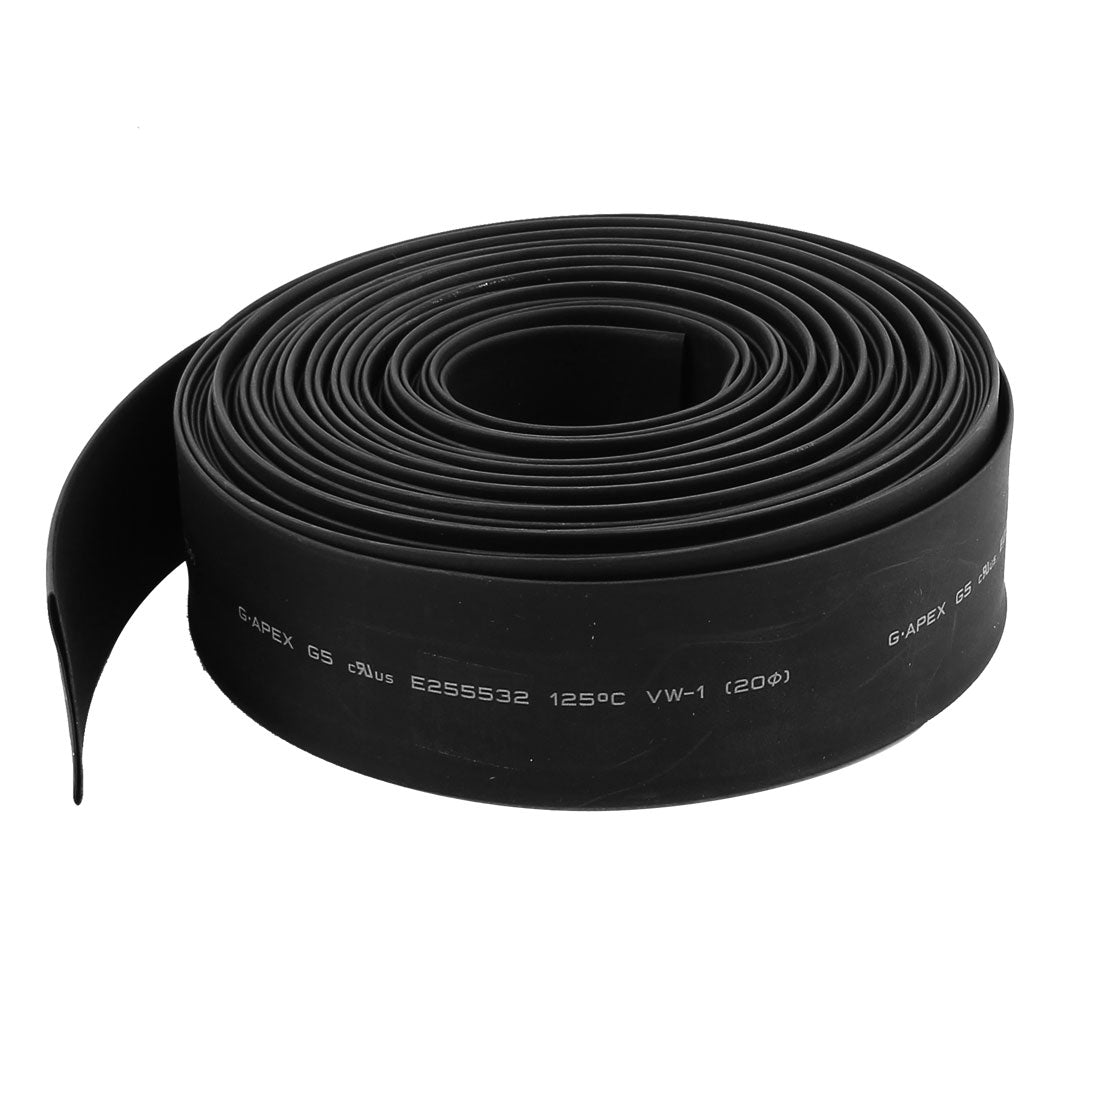 uxcell Uxcell 32.8ft x 20mm Diameter 2:1 Shrinkage Ratio Insulated Heat Shrink Tubing Black